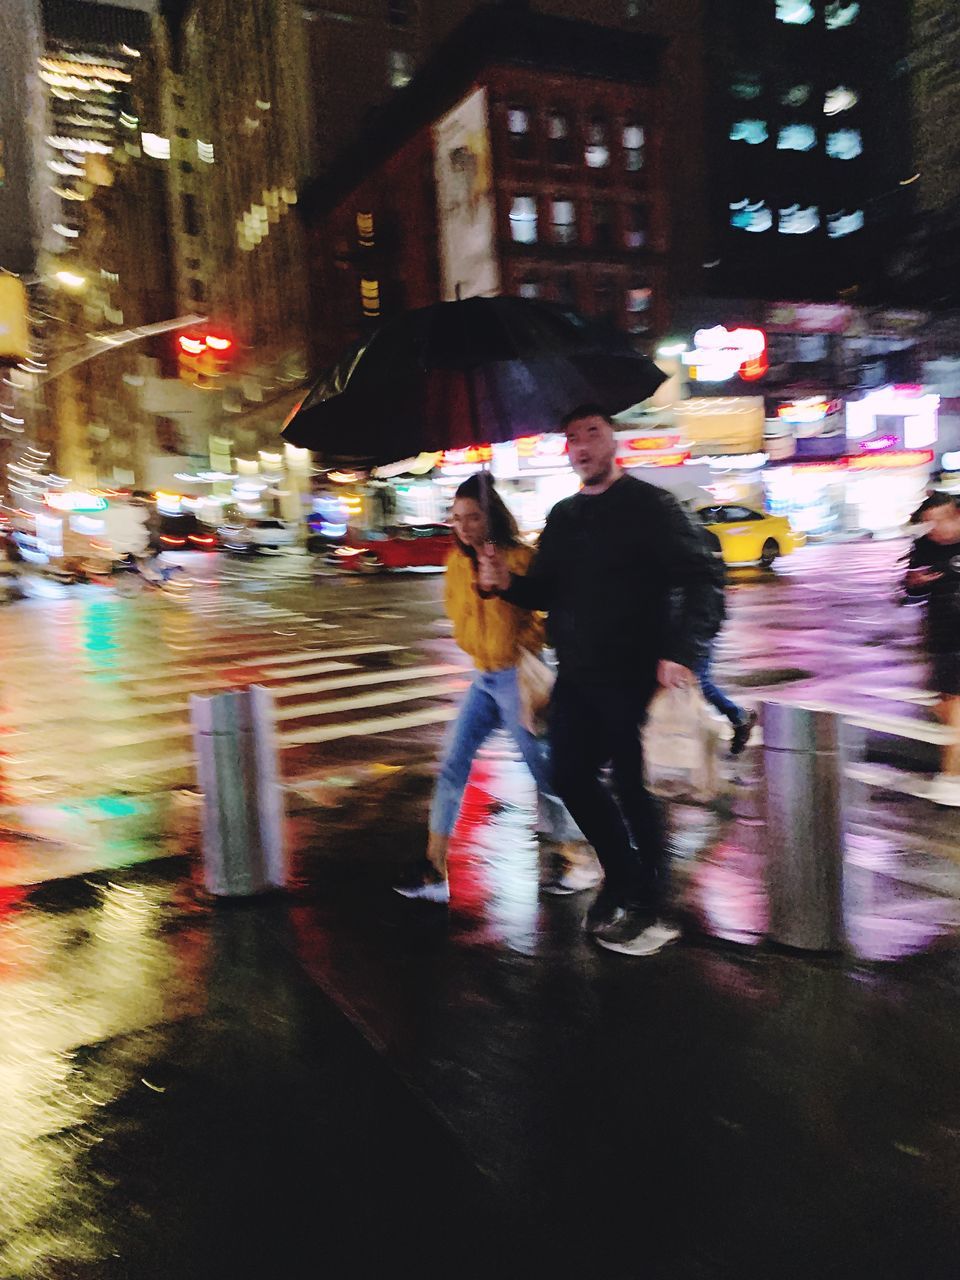 city, street, night, motion, blurred motion, architecture, transportation, city life, building exterior, real people, built structure, illuminated, men, mode of transportation, walking, two people, women, road, people, leisure activity, city street, outdoors, riding, rain